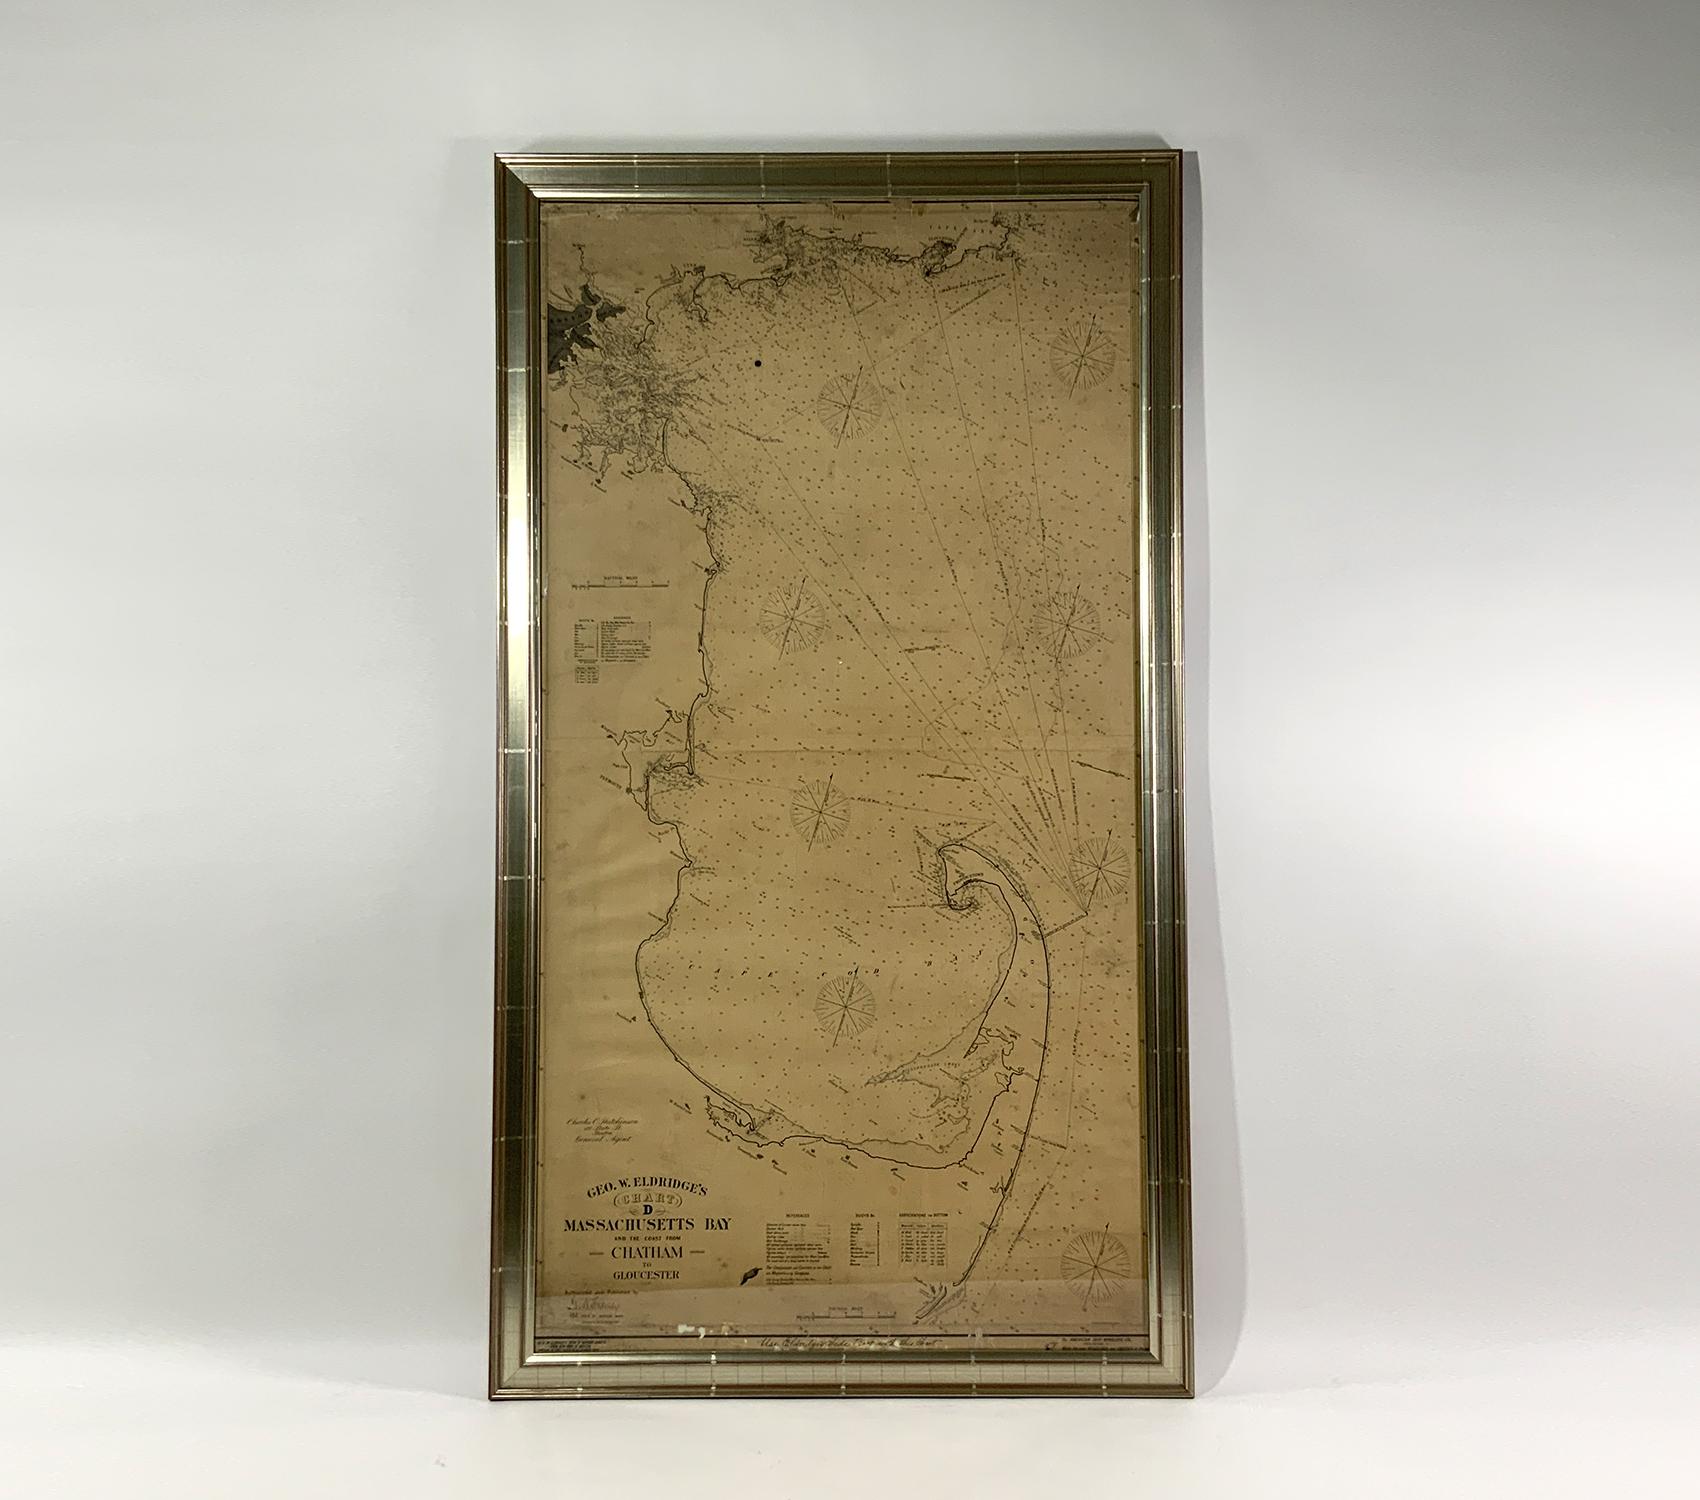 Cape Cod Bay chart from 1904 by George W. Eldridge. This chart 